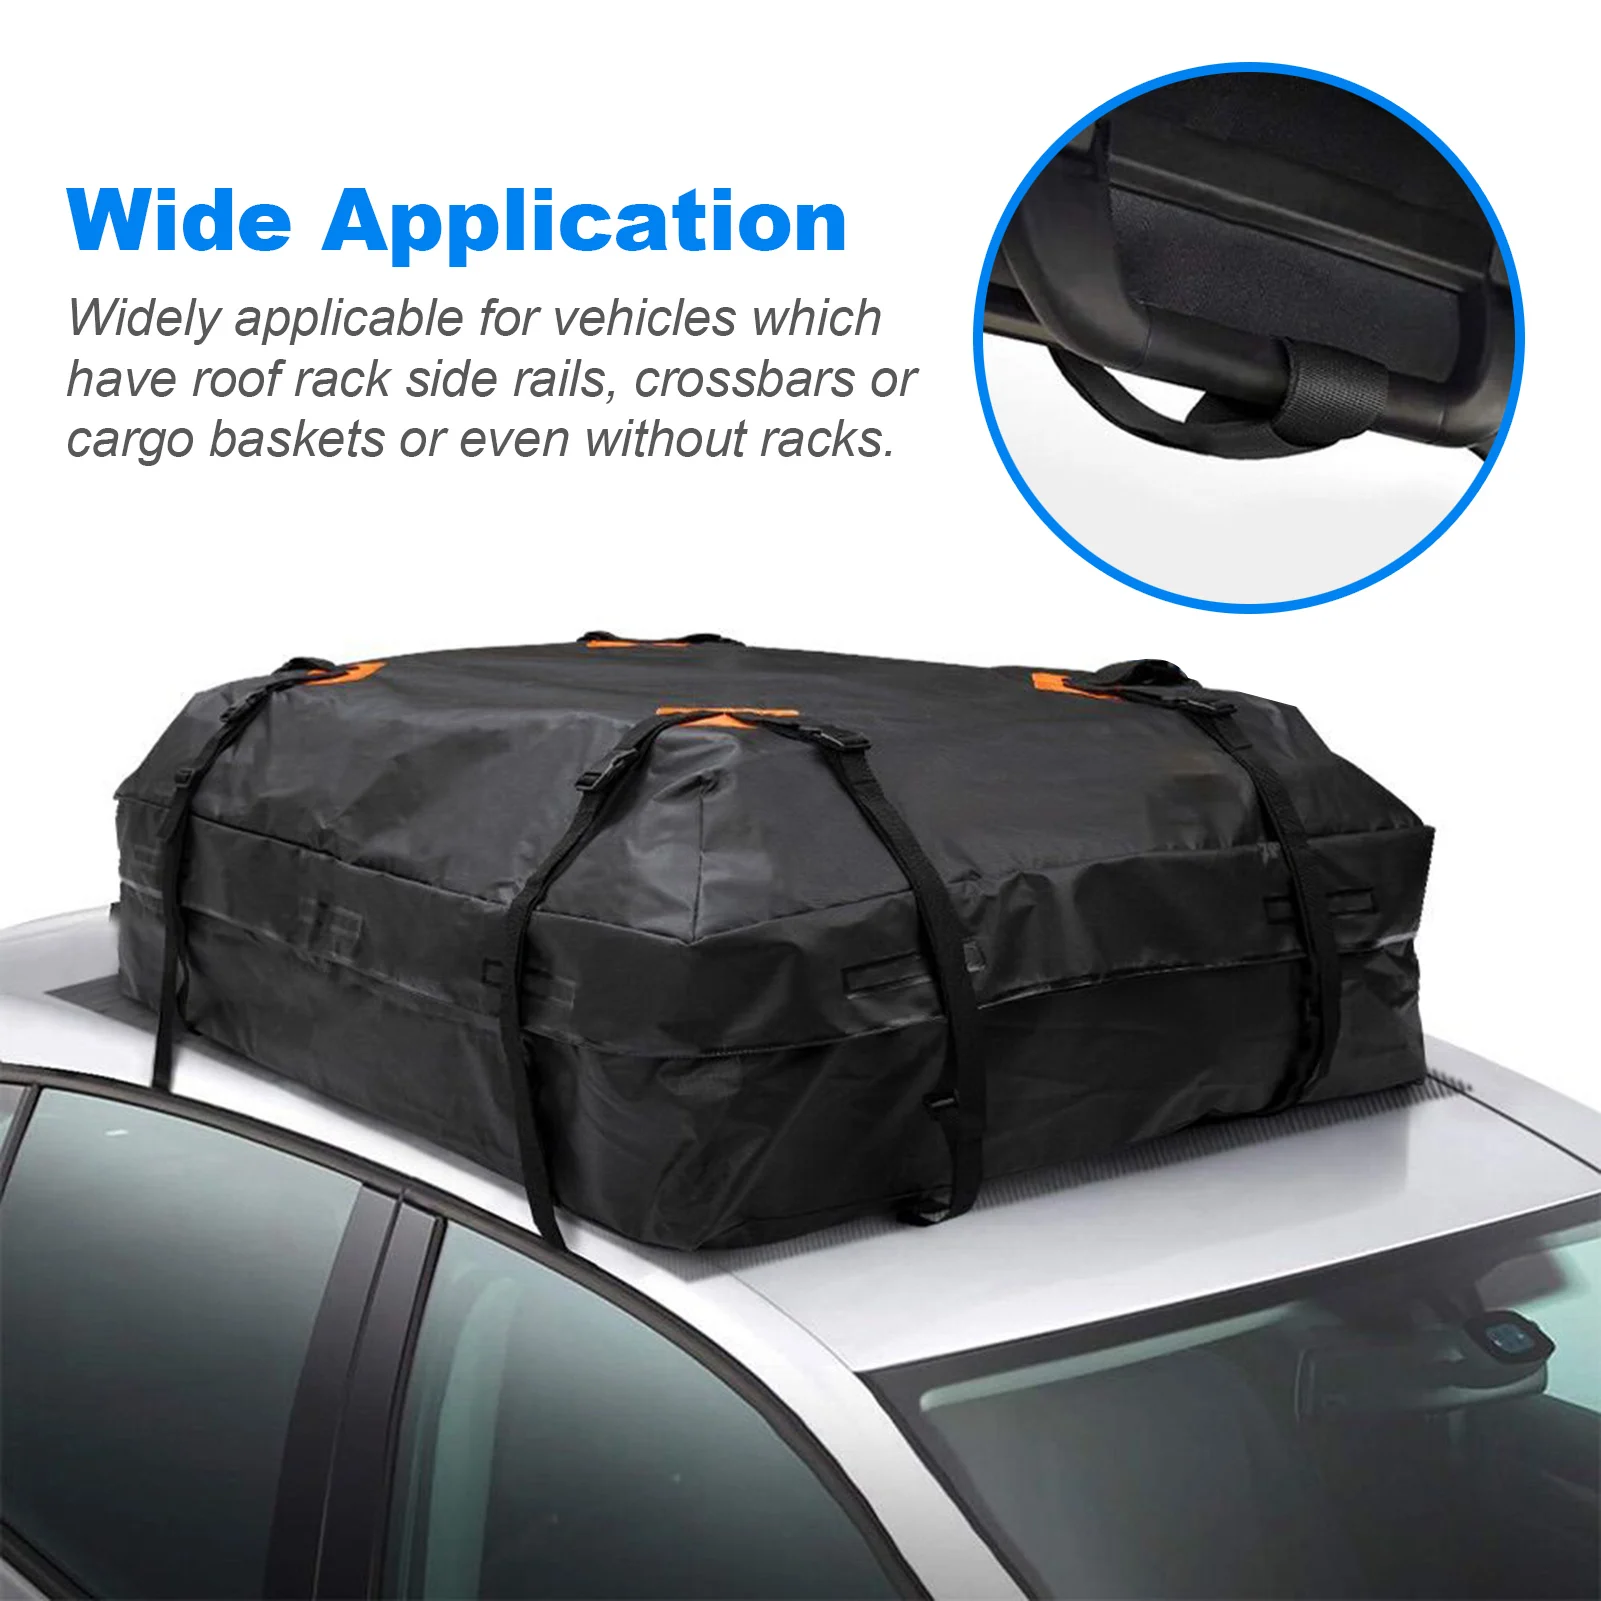 420D Waterproof Cargo Bag Car Roof Cargo Carrier Universal Luggage Bag Storage Cube Bag for Travel Camping Luggage Storage Box